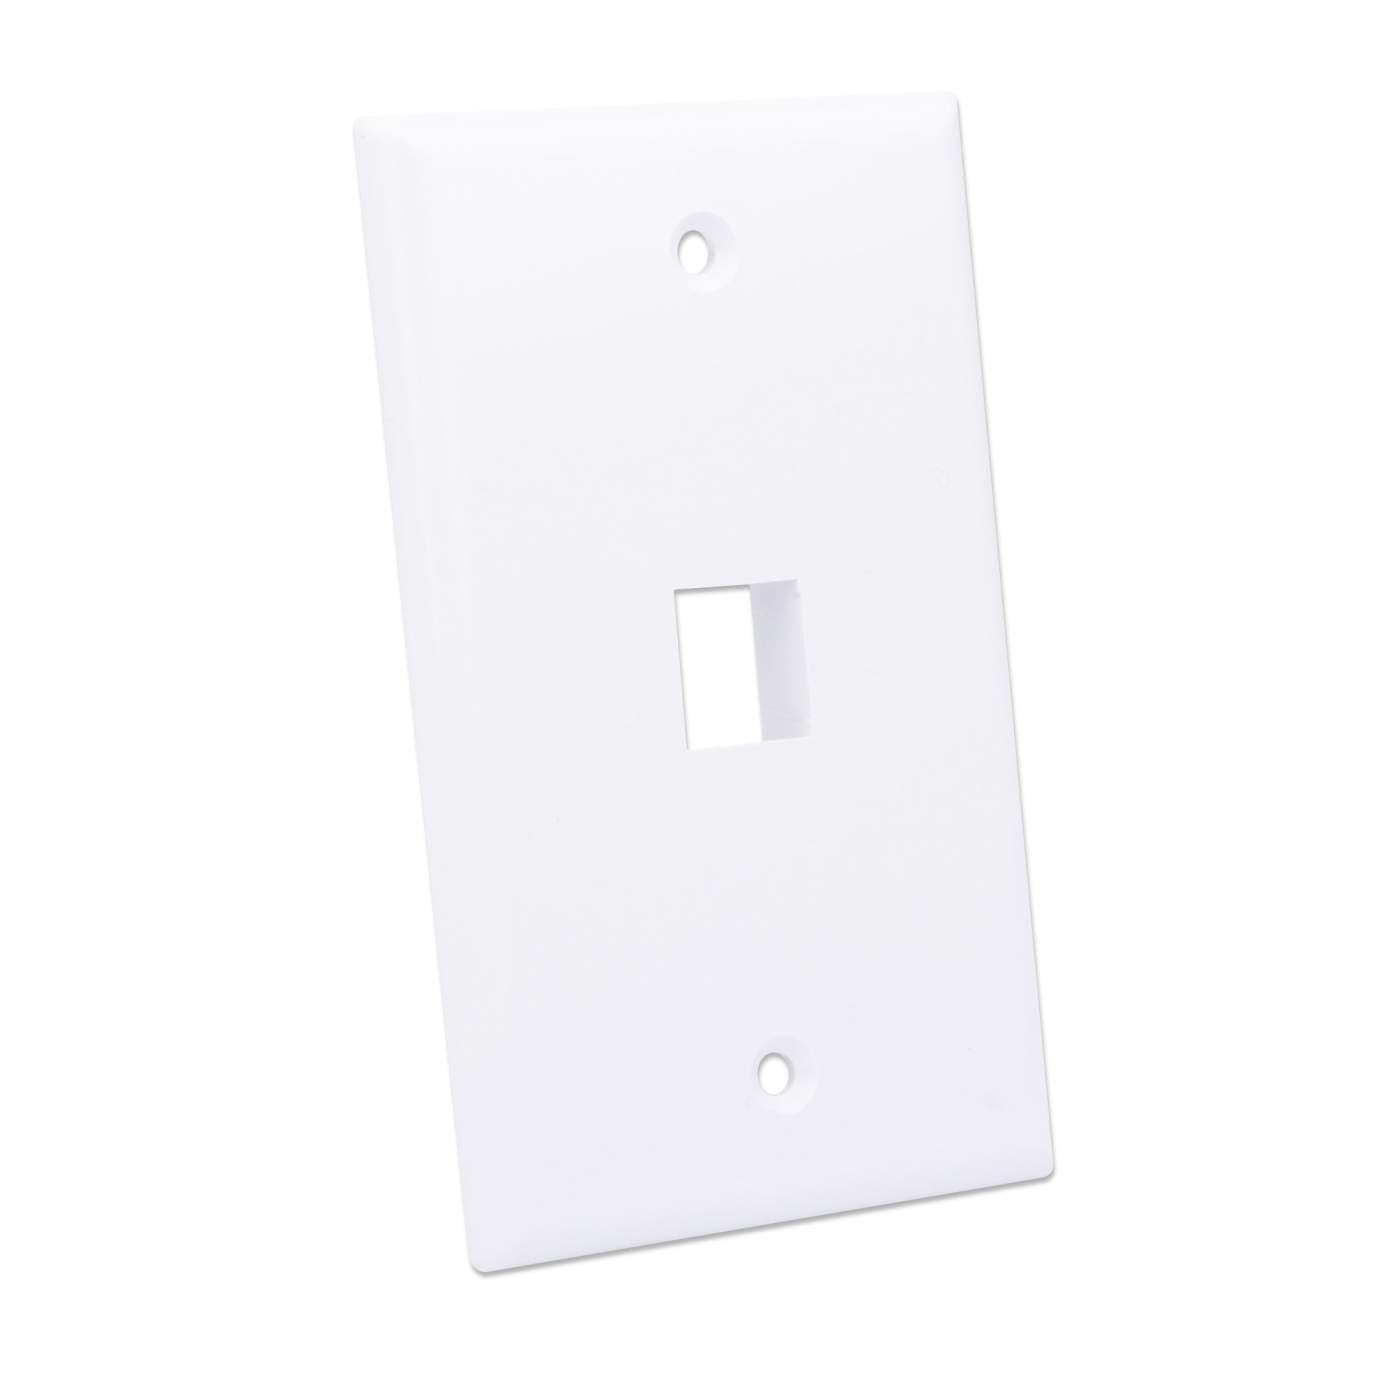 1-Outlet Keystone Wall Plate Image 3